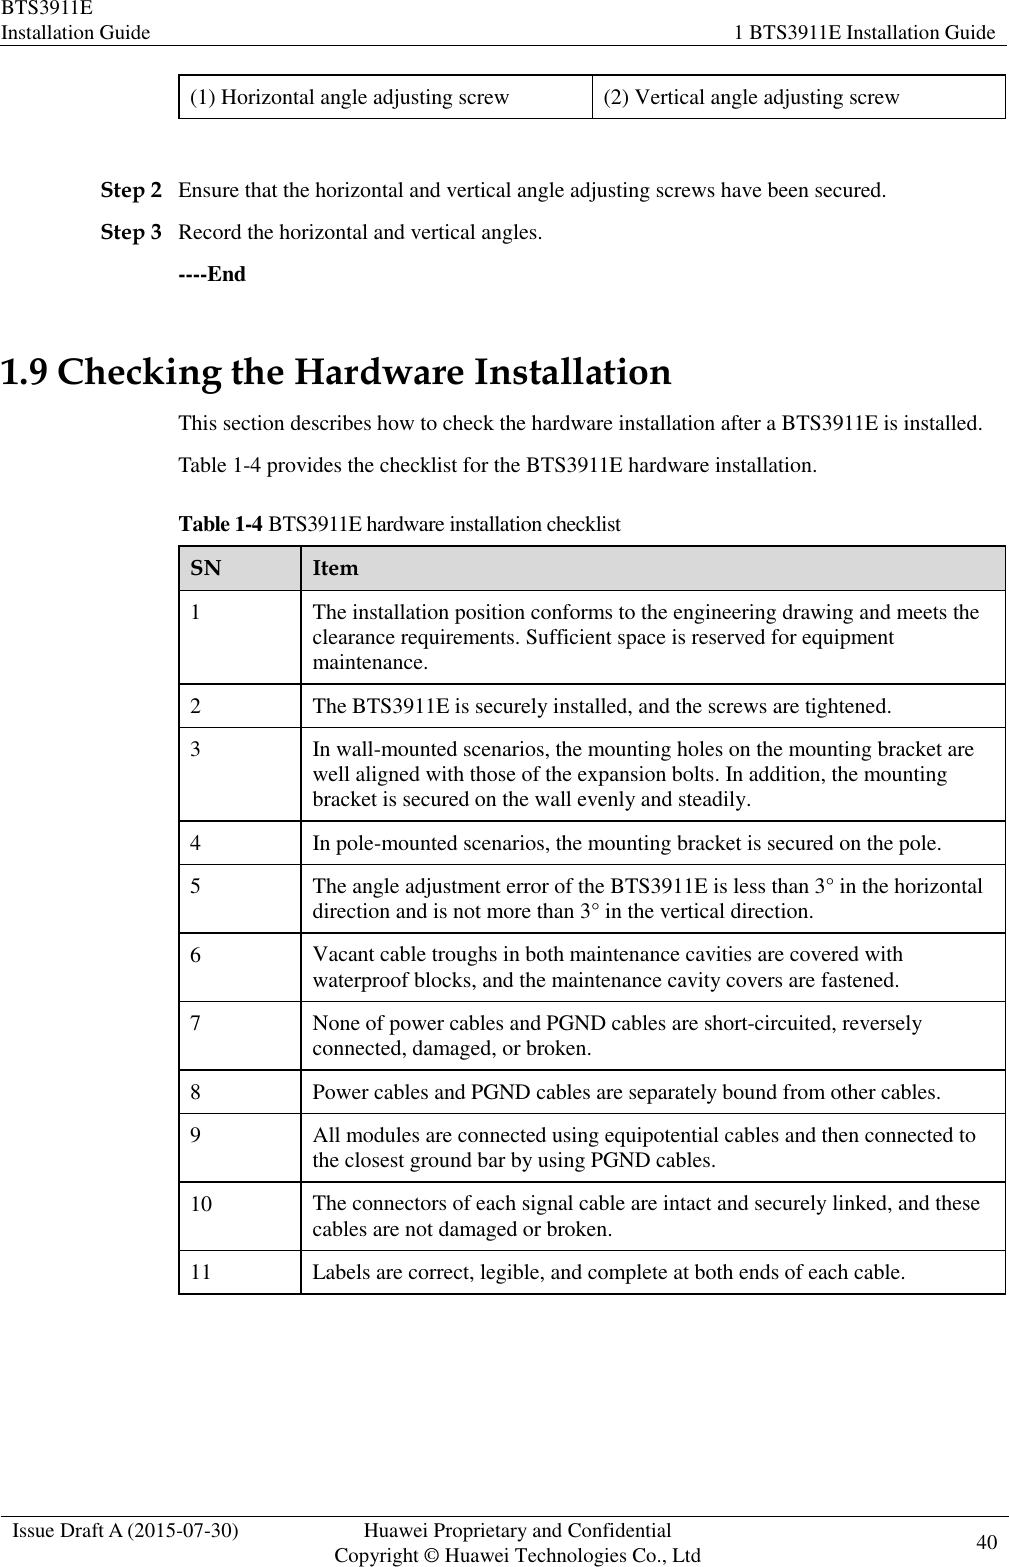 BTS3911E Installation Guide 1 BTS3911E Installation Guide  Issue Draft A (2015-07-30) Huawei Proprietary and Confidential           Copyright © Huawei Technologies Co., Ltd 40    (1) Horizontal angle adjusting screw (2) Vertical angle adjusting screw  Step 2 Ensure that the horizontal and vertical angle adjusting screws have been secured.   Step 3 Record the horizontal and vertical angles. ----End 1.9 Checking the Hardware Installation This section describes how to check the hardware installation after a BTS3911E is installed. Table 1-4 provides the checklist for the BTS3911E hardware installation. Table 1-4 BTS3911E hardware installation checklist SN Item 1 The installation position conforms to the engineering drawing and meets the clearance requirements. Sufficient space is reserved for equipment maintenance. 2 The BTS3911E is securely installed, and the screws are tightened. 3 In wall-mounted scenarios, the mounting holes on the mounting bracket are well aligned with those of the expansion bolts. In addition, the mounting bracket is secured on the wall evenly and steadily.   4 In pole-mounted scenarios, the mounting bracket is secured on the pole. 5 The angle adjustment error of the BTS3911E is less than 3° in the horizontal direction and is not more than 3° in the vertical direction. 6 Vacant cable troughs in both maintenance cavities are covered with waterproof blocks, and the maintenance cavity covers are fastened. 7 None of power cables and PGND cables are short-circuited, reversely connected, damaged, or broken. 8 Power cables and PGND cables are separately bound from other cables. 9 All modules are connected using equipotential cables and then connected to the closest ground bar by using PGND cables. 10 The connectors of each signal cable are intact and securely linked, and these cables are not damaged or broken. 11 Labels are correct, legible, and complete at both ends of each cable.  